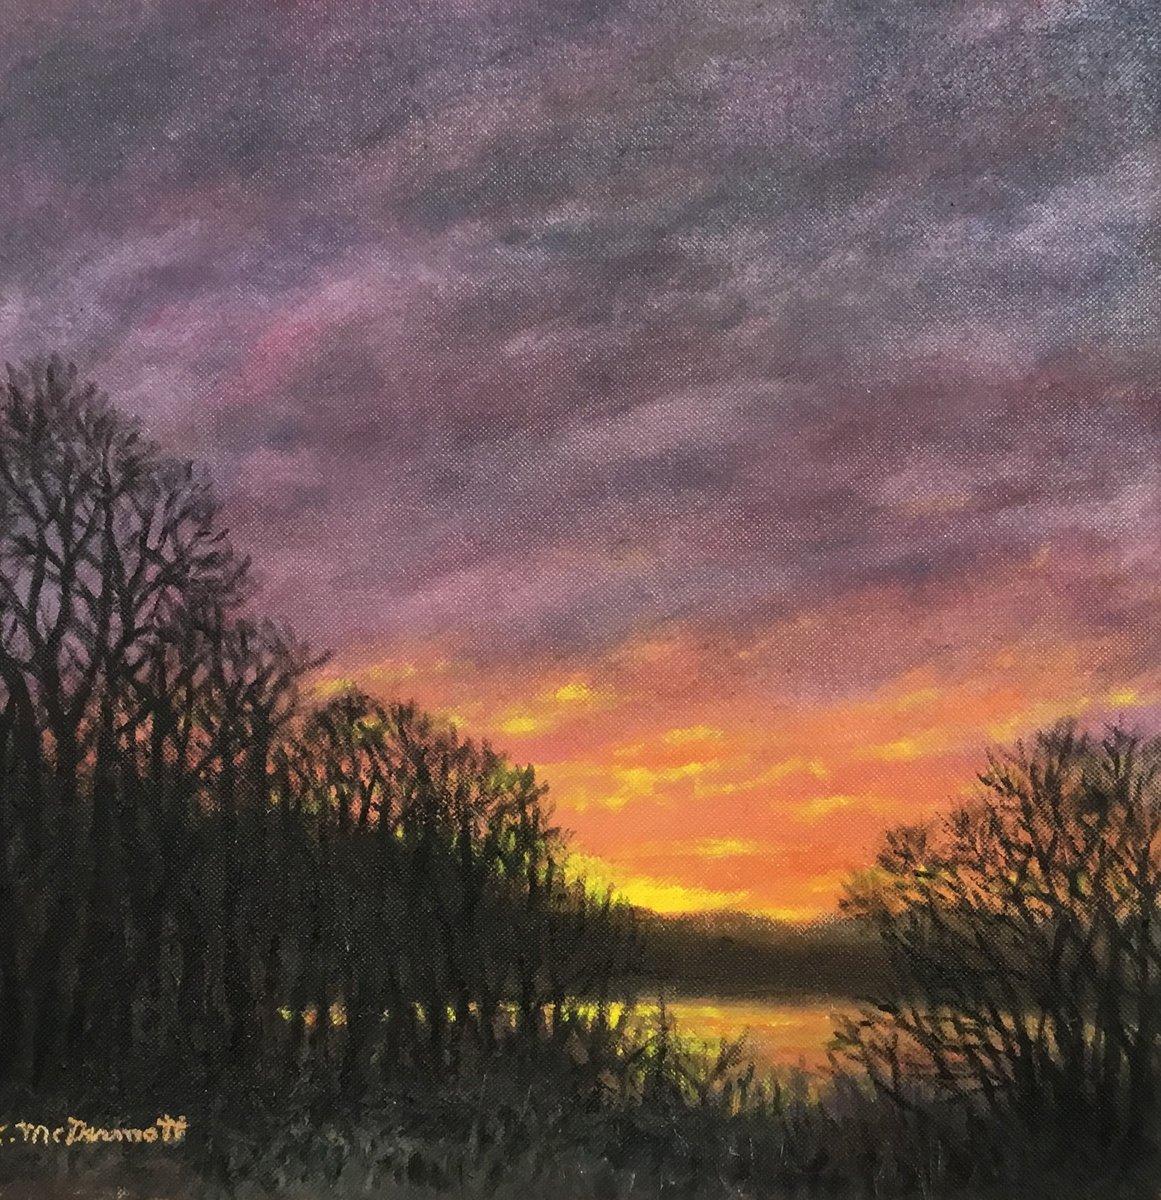 NEW DAY DAWNING # 2 - oil 10X10 canvas by Kathleen McDermott